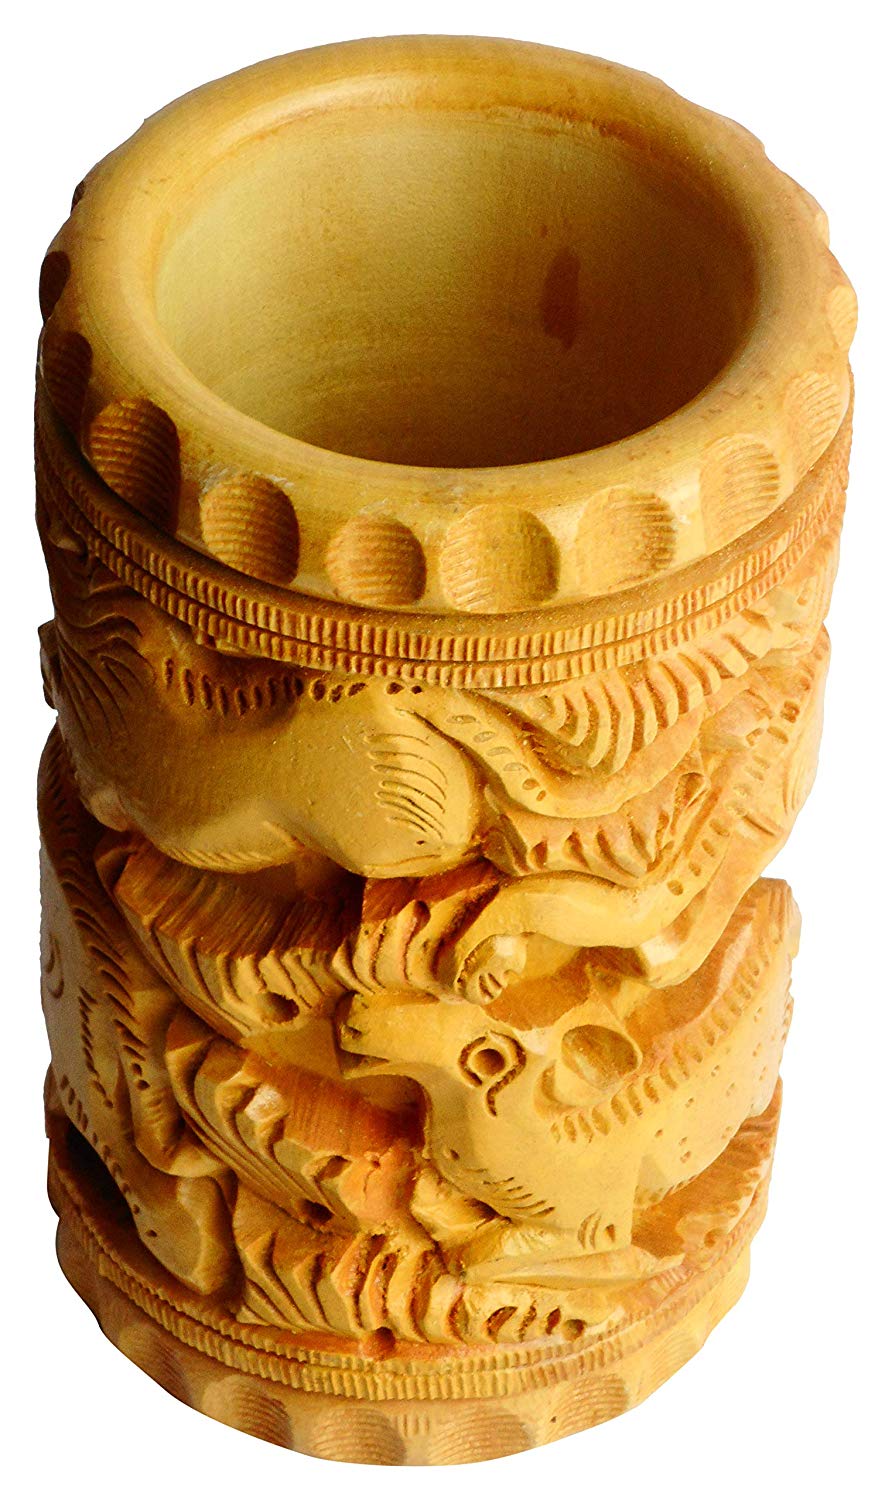 Wooden Hand Carved Pen and Pencil Holder For Decor